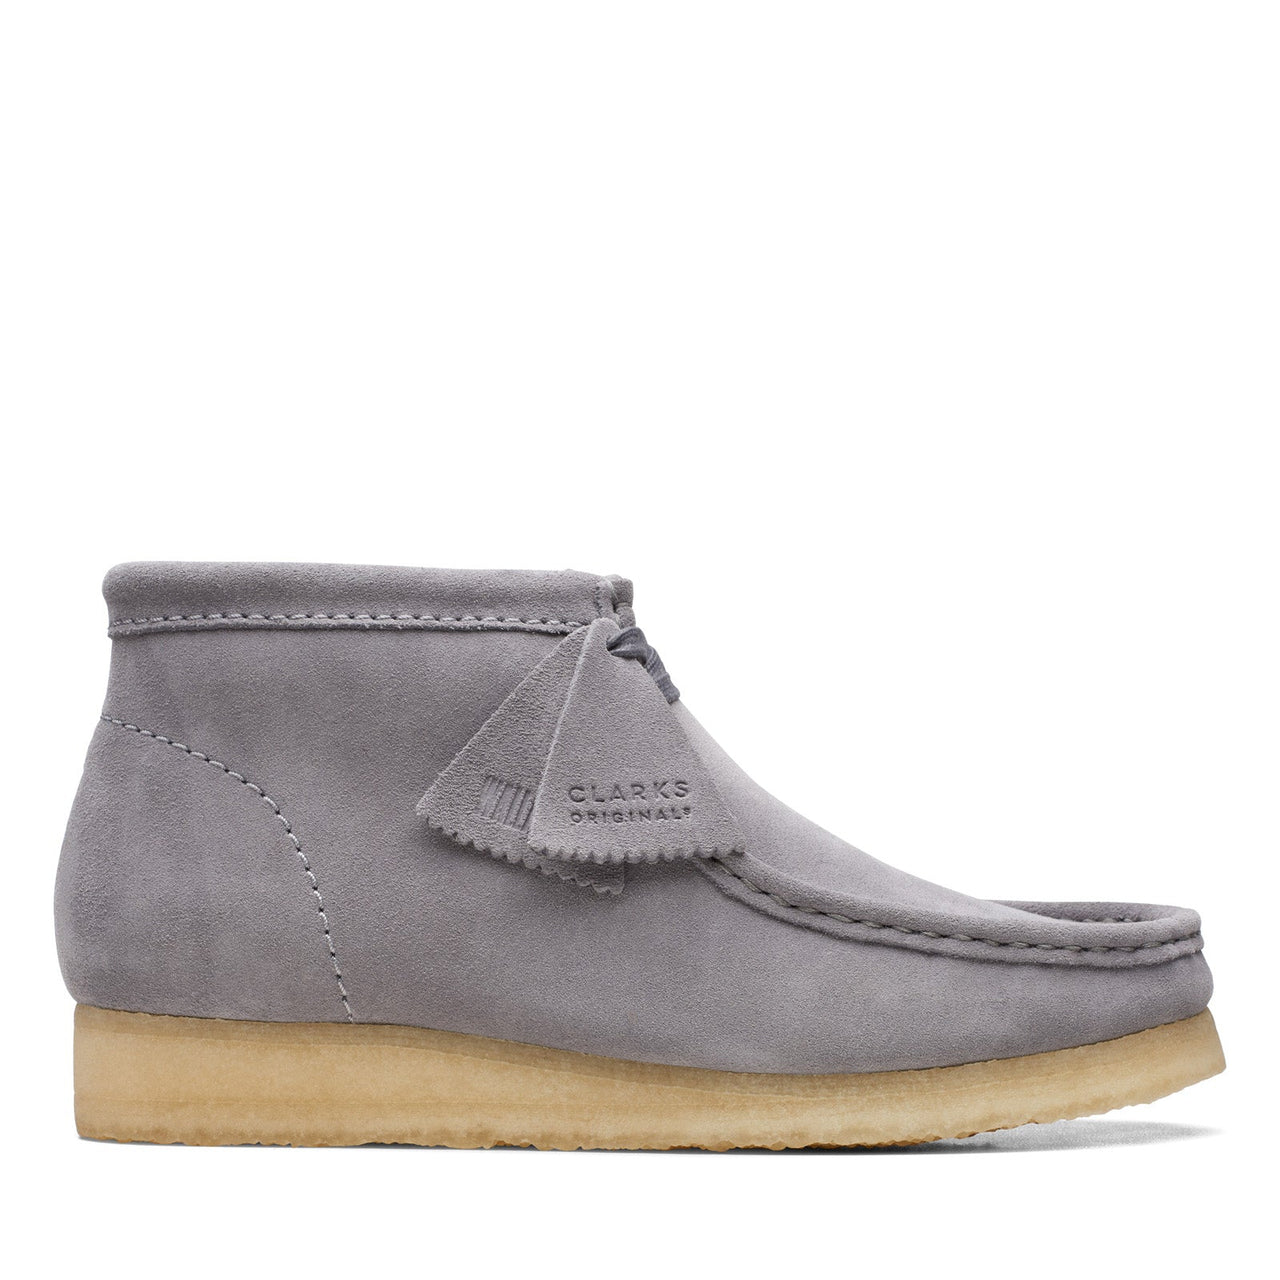 Clarks Wallabee Boot 26169731 Mens Gray Suede Lace Up Chukkas Boots